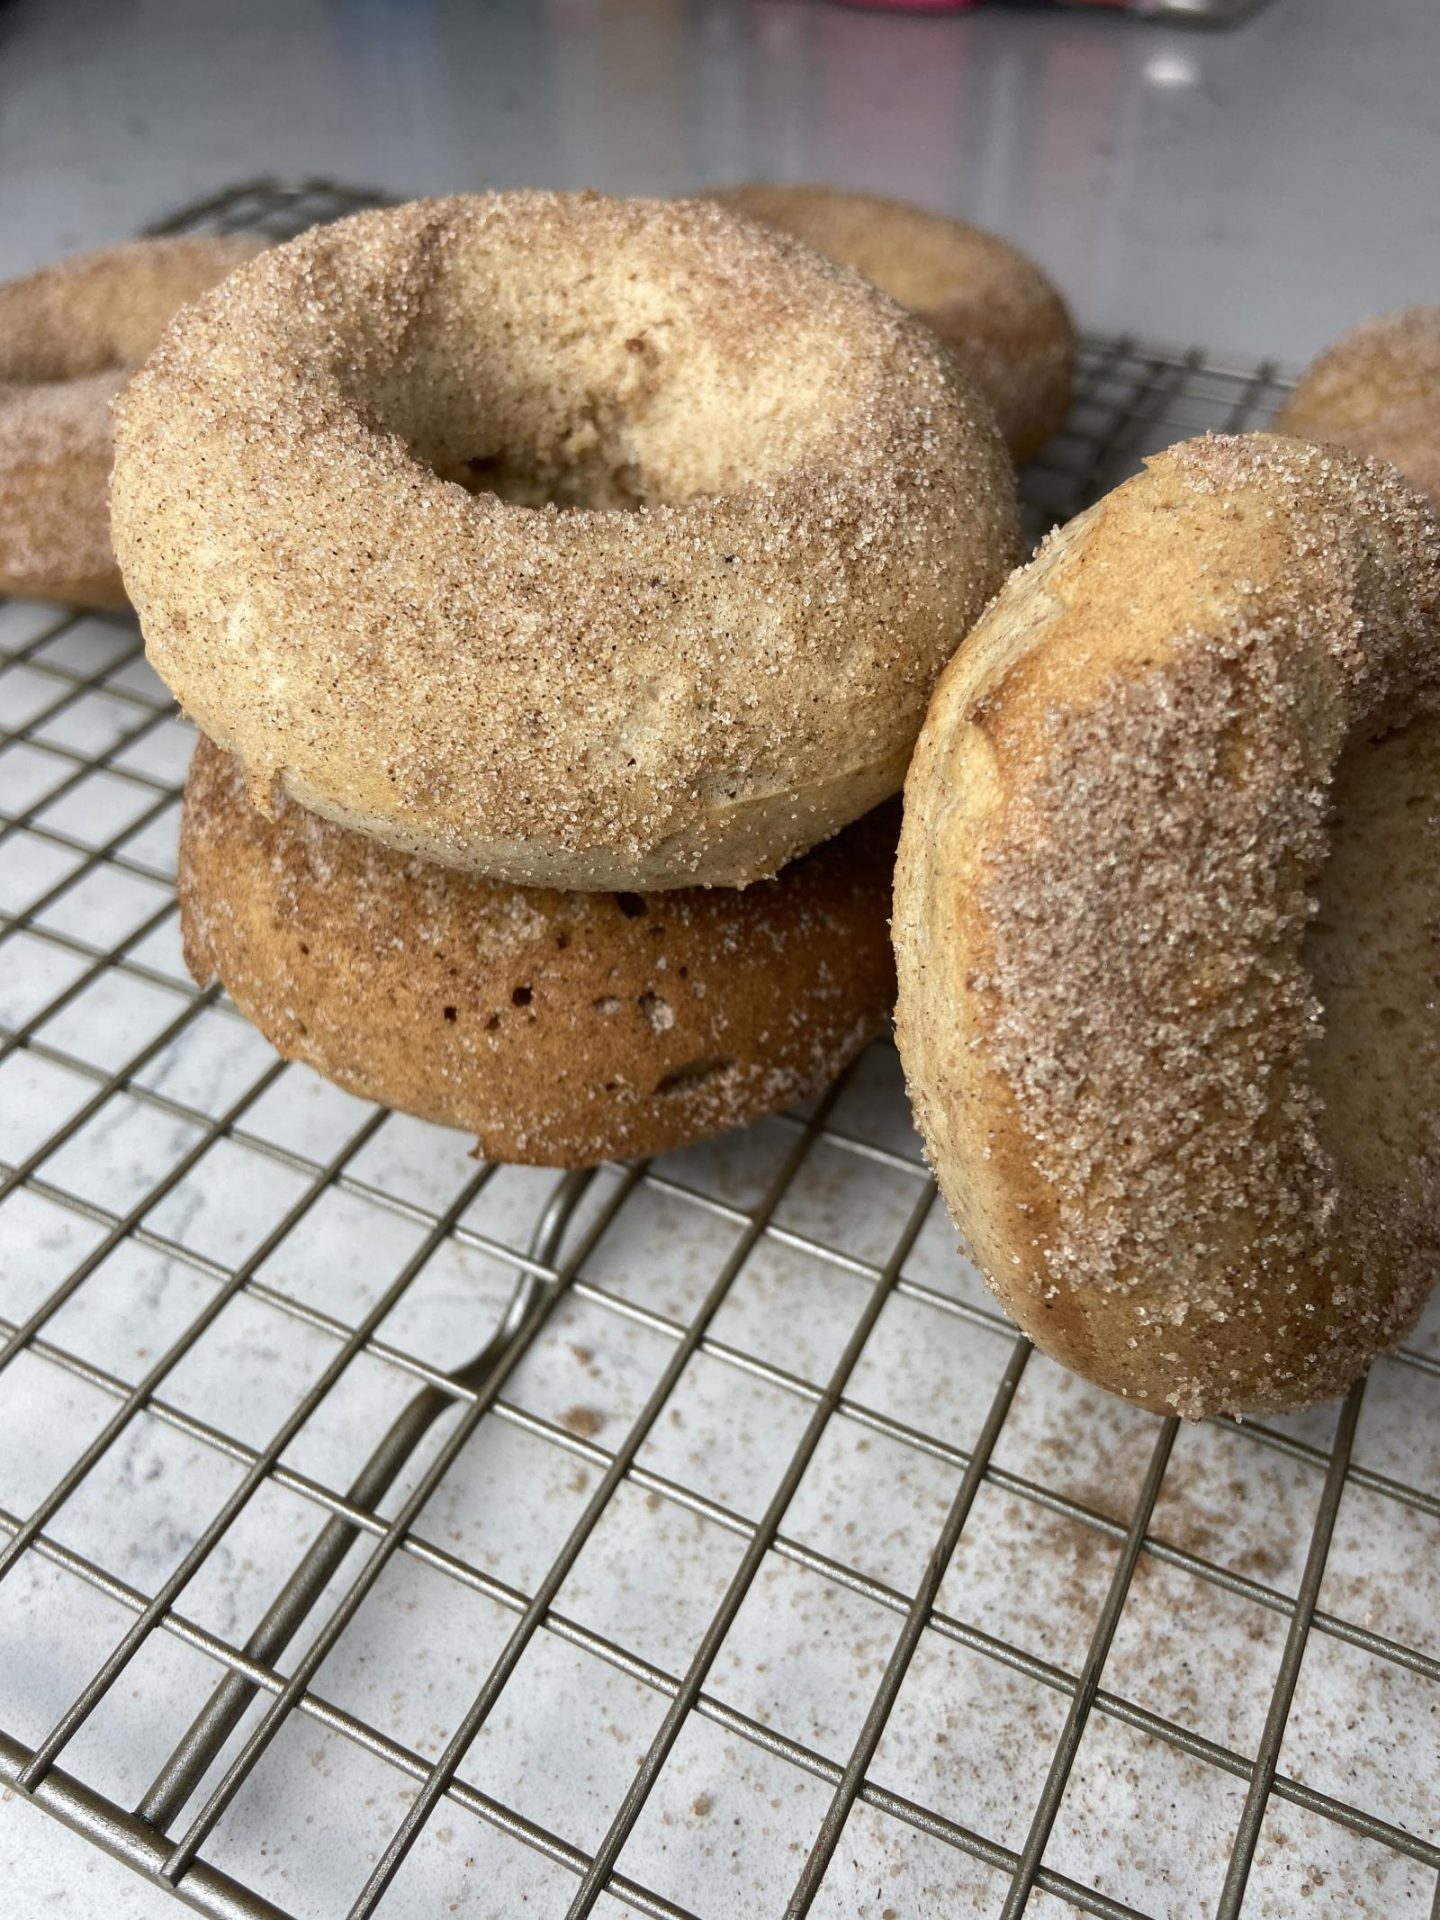 Baked Old Fashioned Donuts